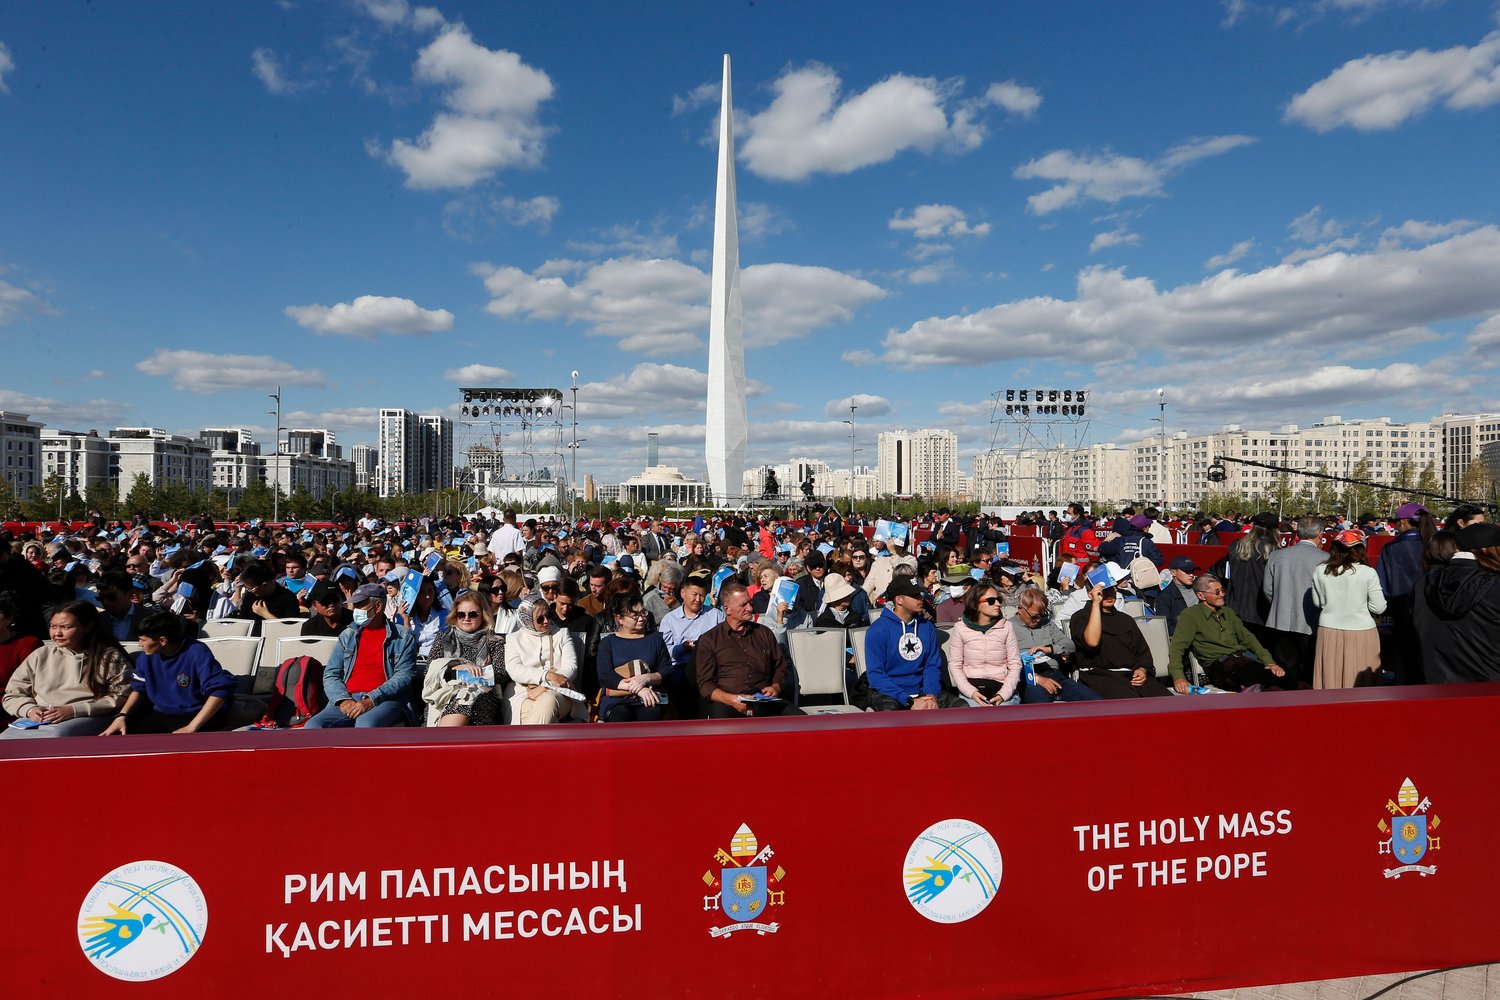 People wait for the start of Pope Francis' Mass at the Expo grounds in Nur-Sultan, Kazakhstan, Sept. 14.